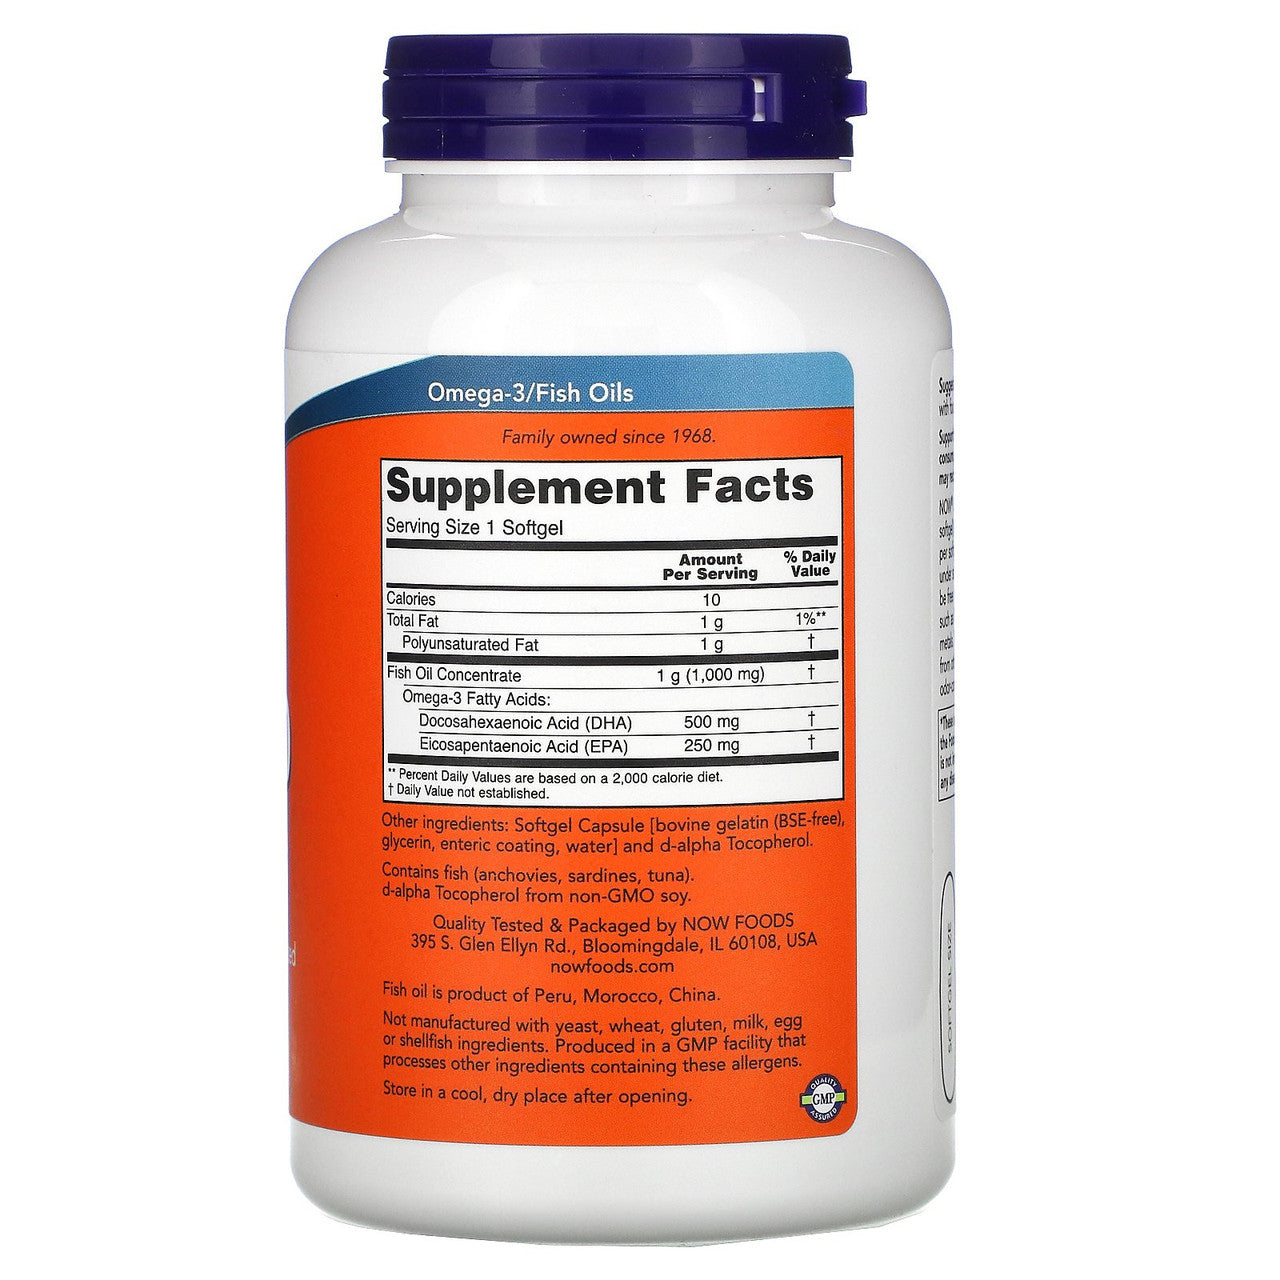 Now DHA-500 Supplement Facts Label